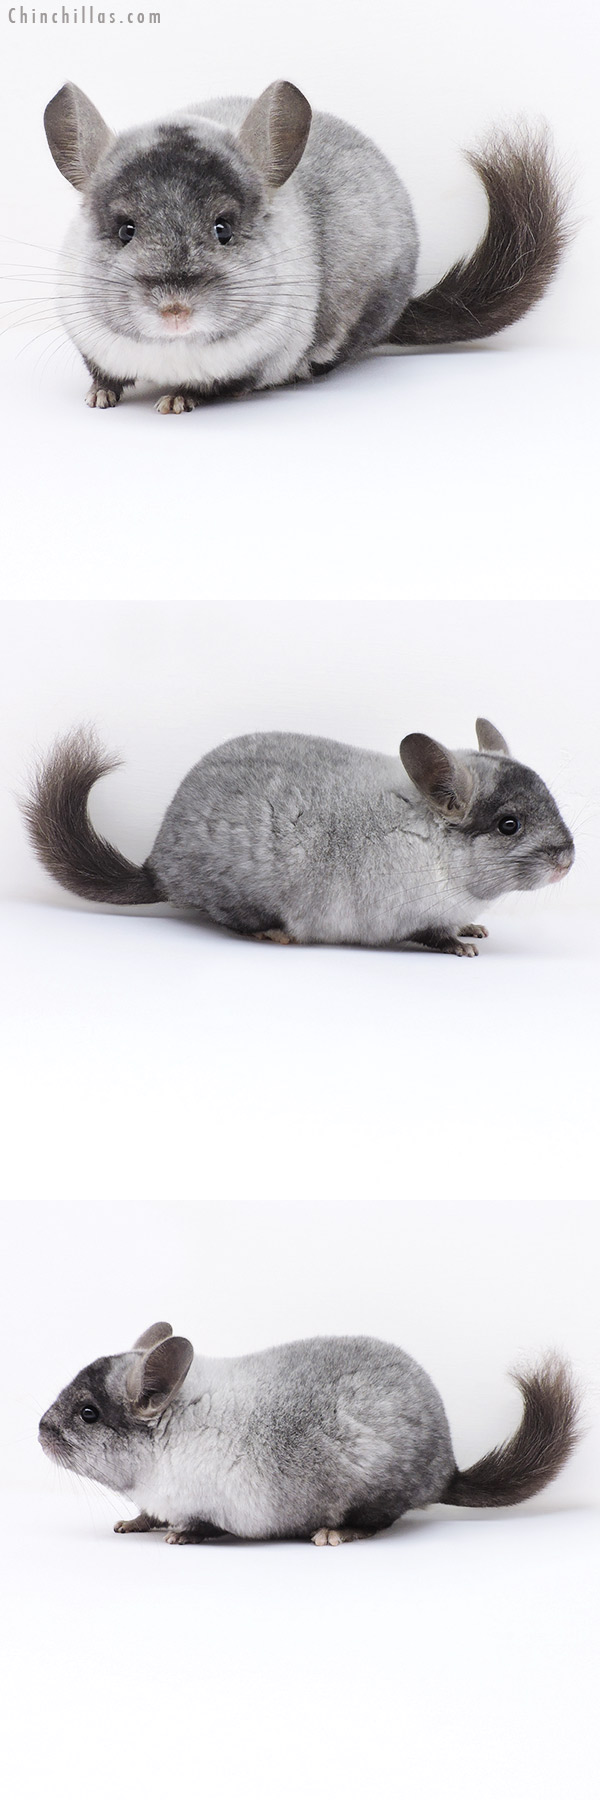 Chinchilla or related item offered for sale or export on Chinchillas.com - 19035 Exceptional Ebony and White Mosaic ( Locken Carrier ) Male Chinchilla